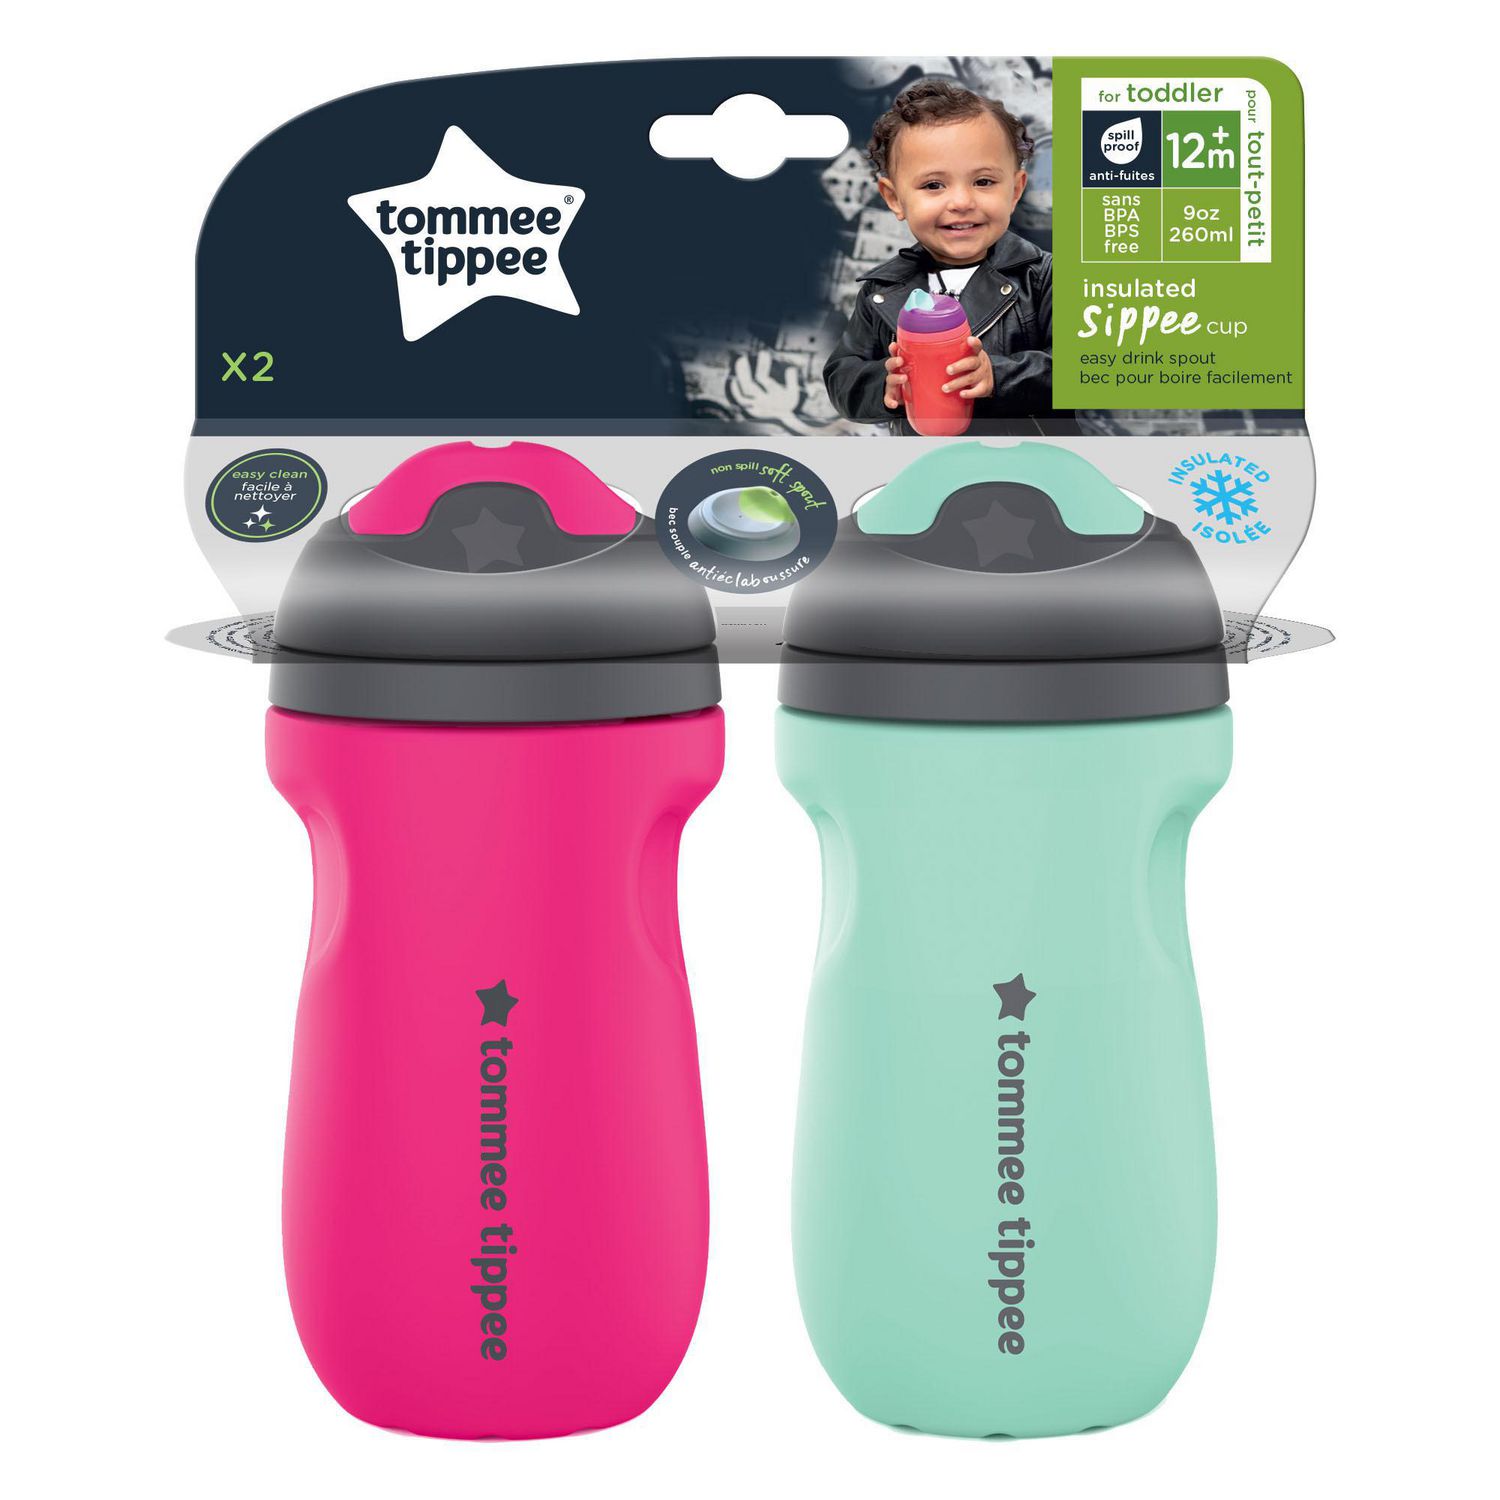 Gobelet isotherme Superstar pour tout-petits de Tommee Tippee